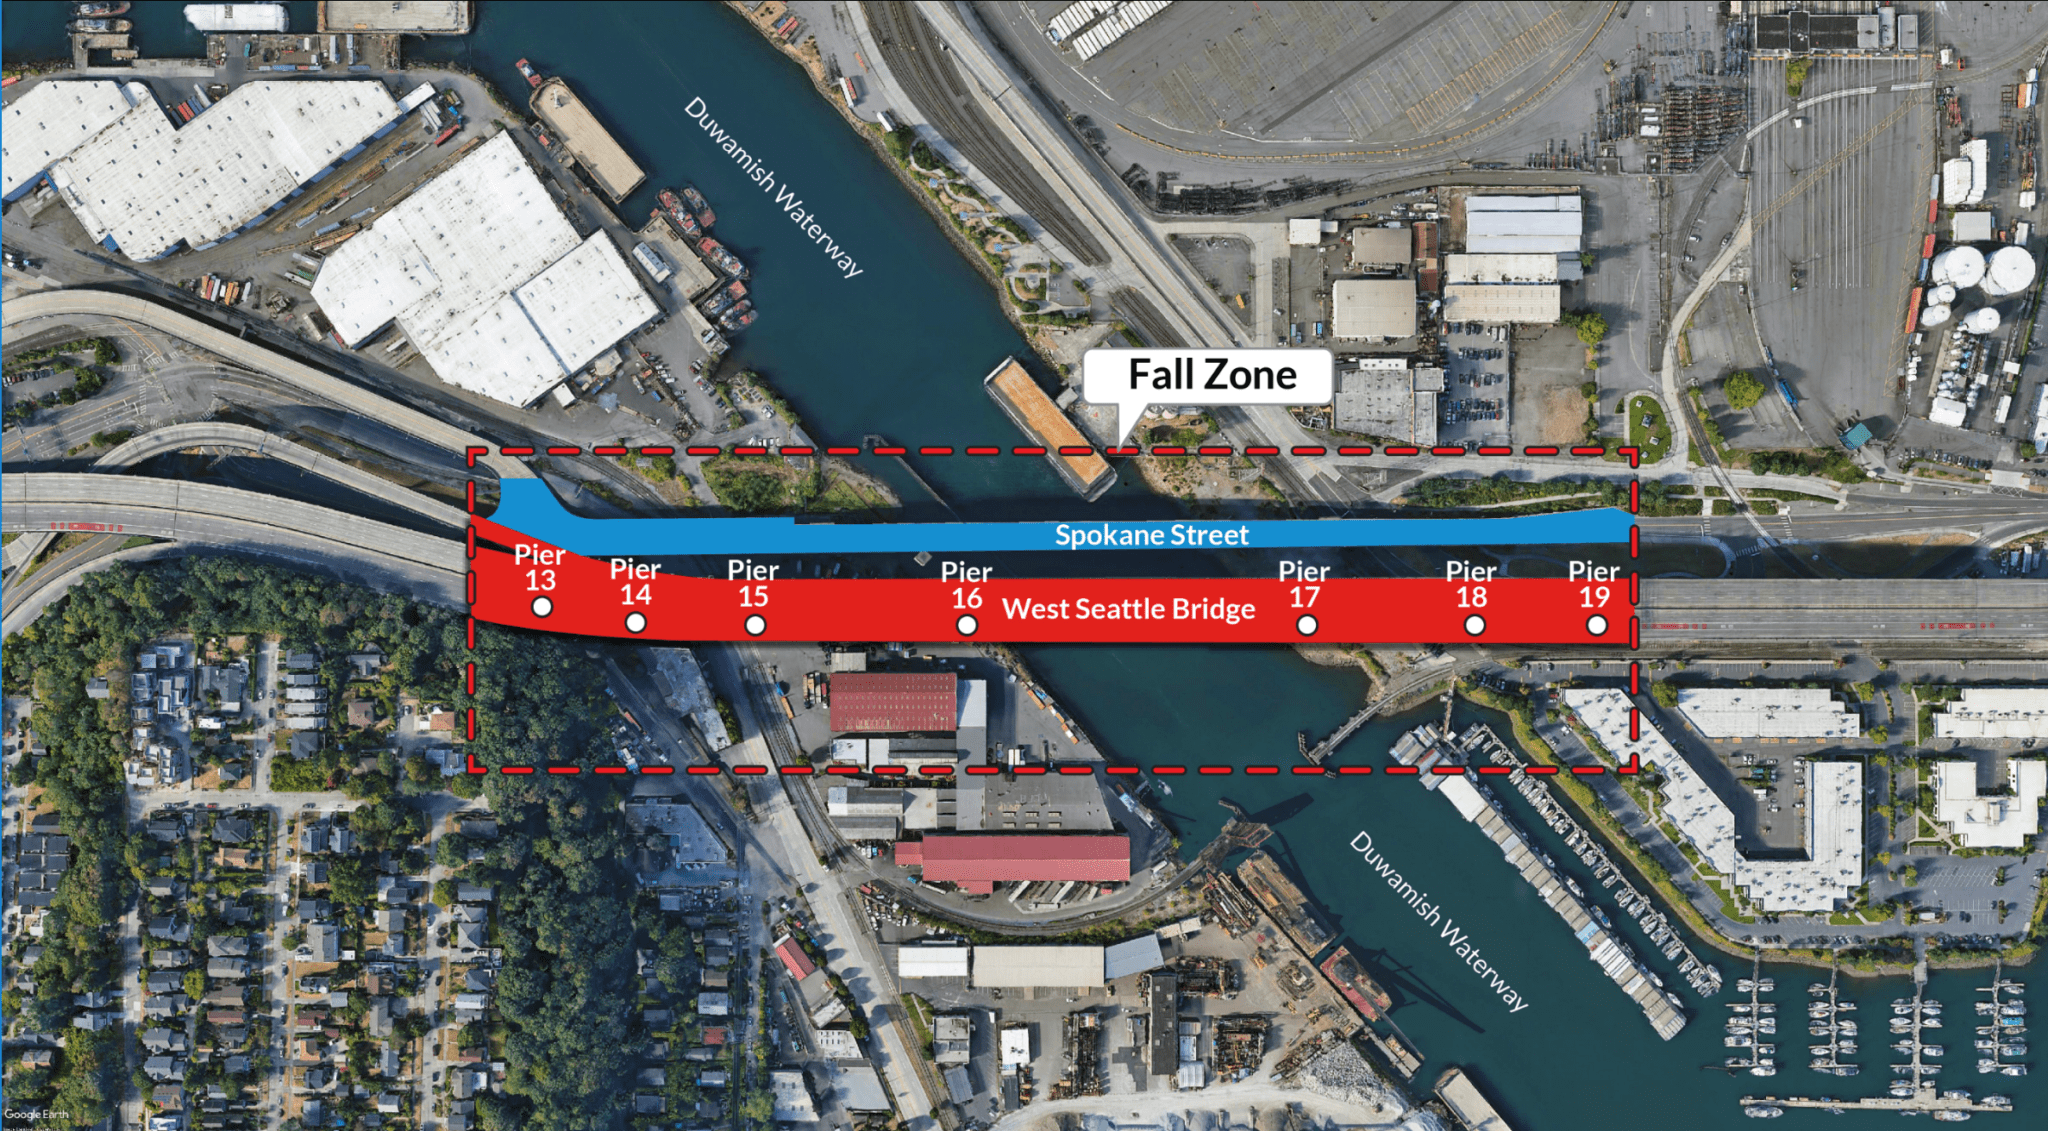 A diagram dictating what parts of the West Seattle Bridge would be vulnerable to collapse if not fixed.